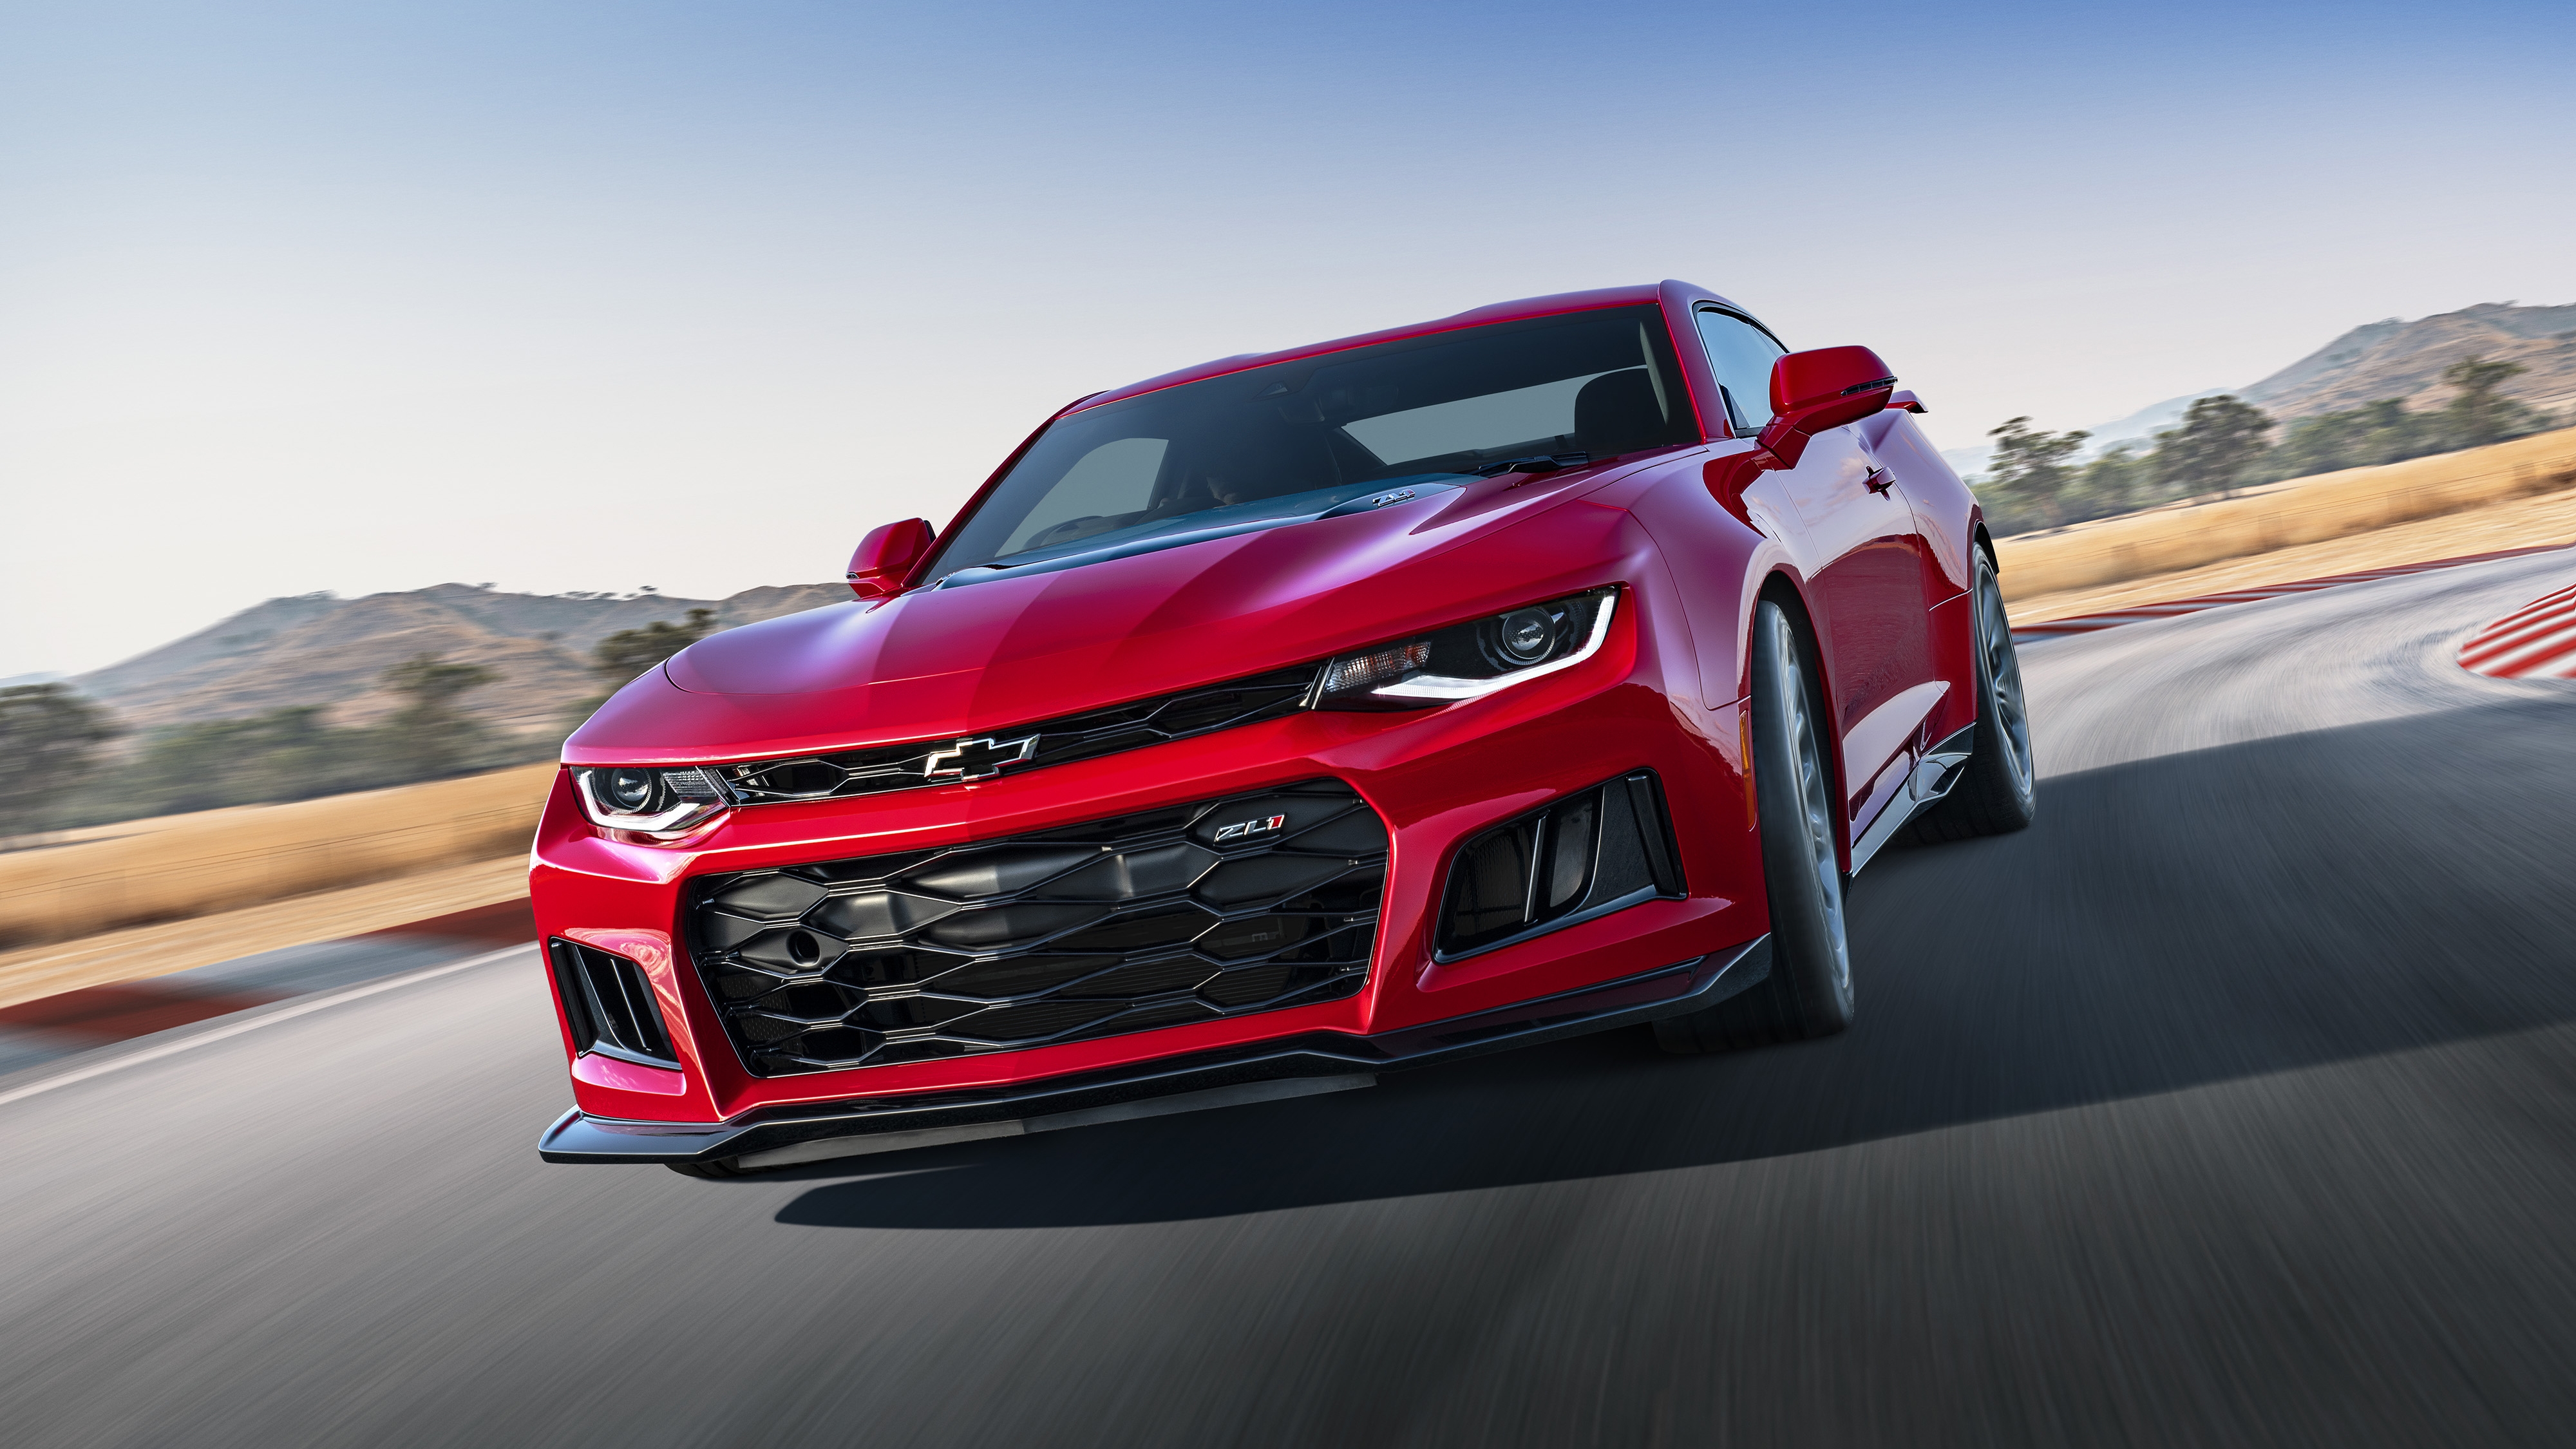 Wallpapers chevrolet camaro red car muscle cars on the desktop